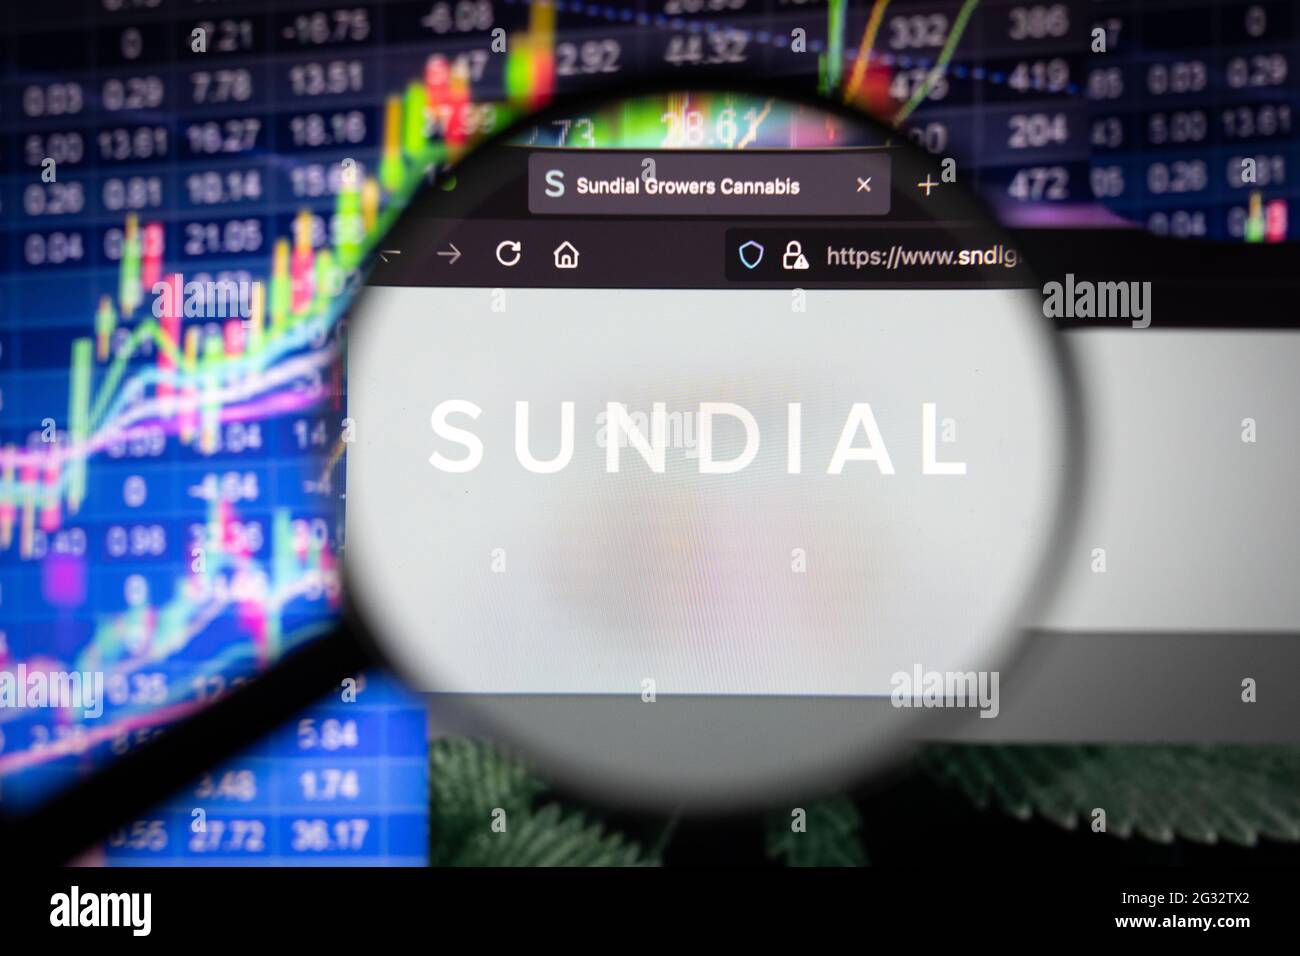 Sundial  company logo on a website with blurry stock market developments in the background, seen on a computer screen through a magnifying glass Stock Photo